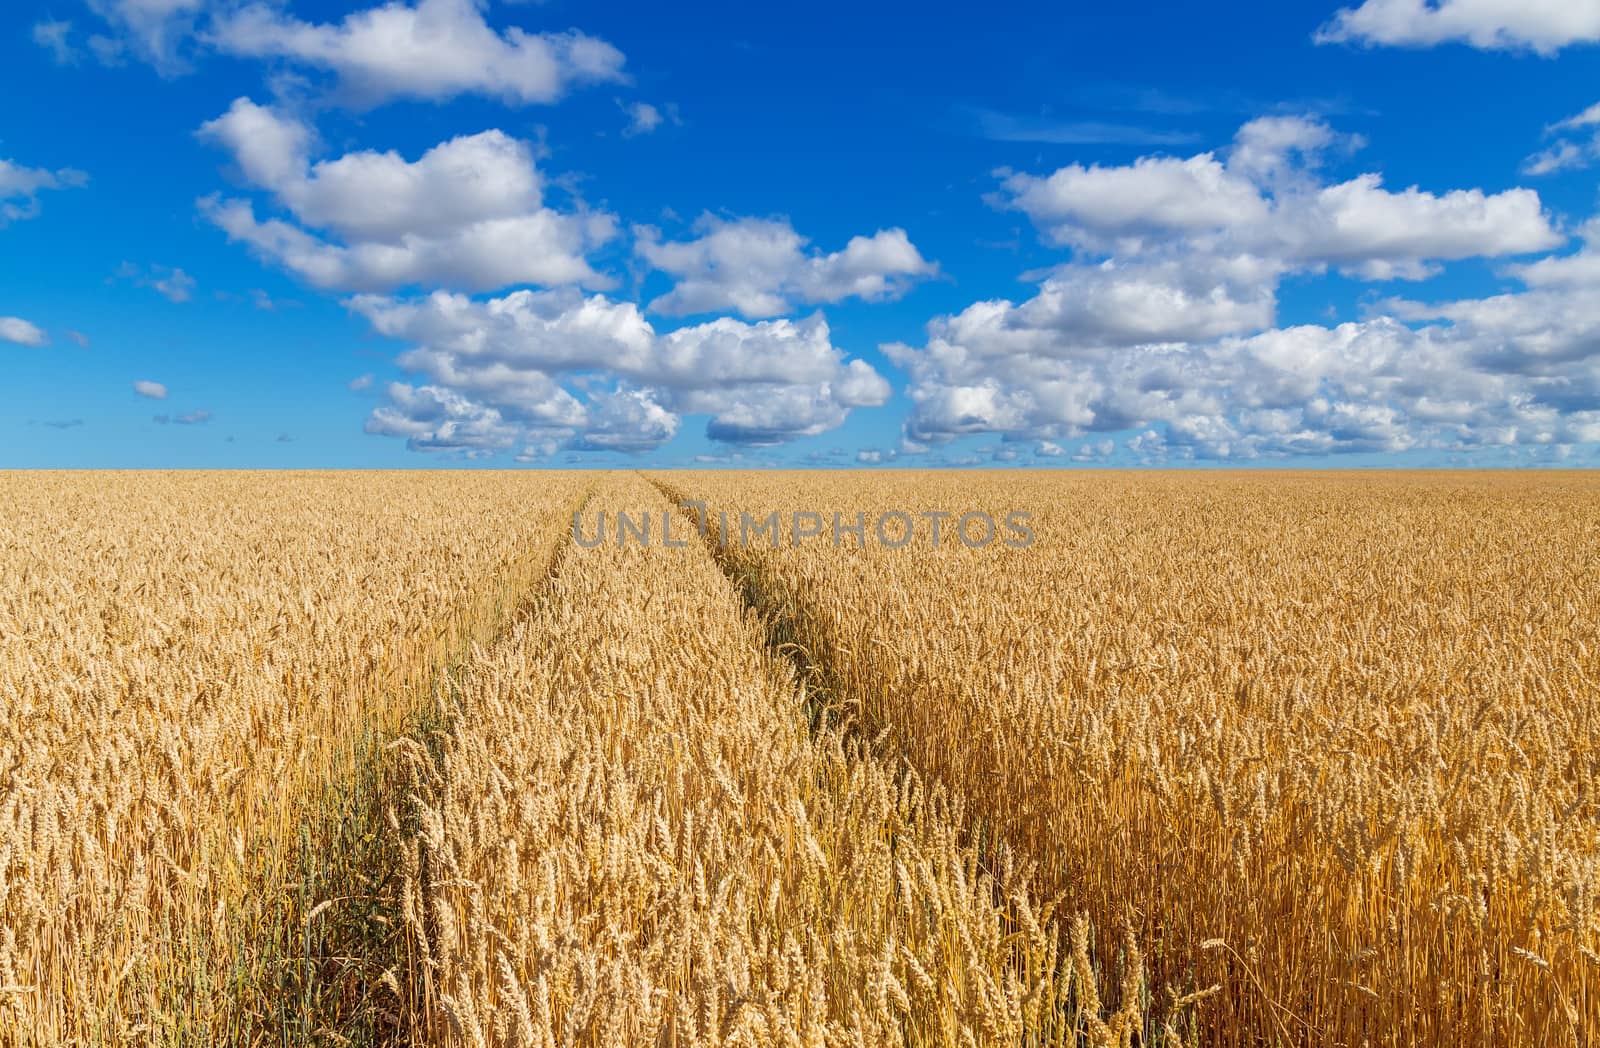 Path in a golden wheat field, under blue sky with clouds. 